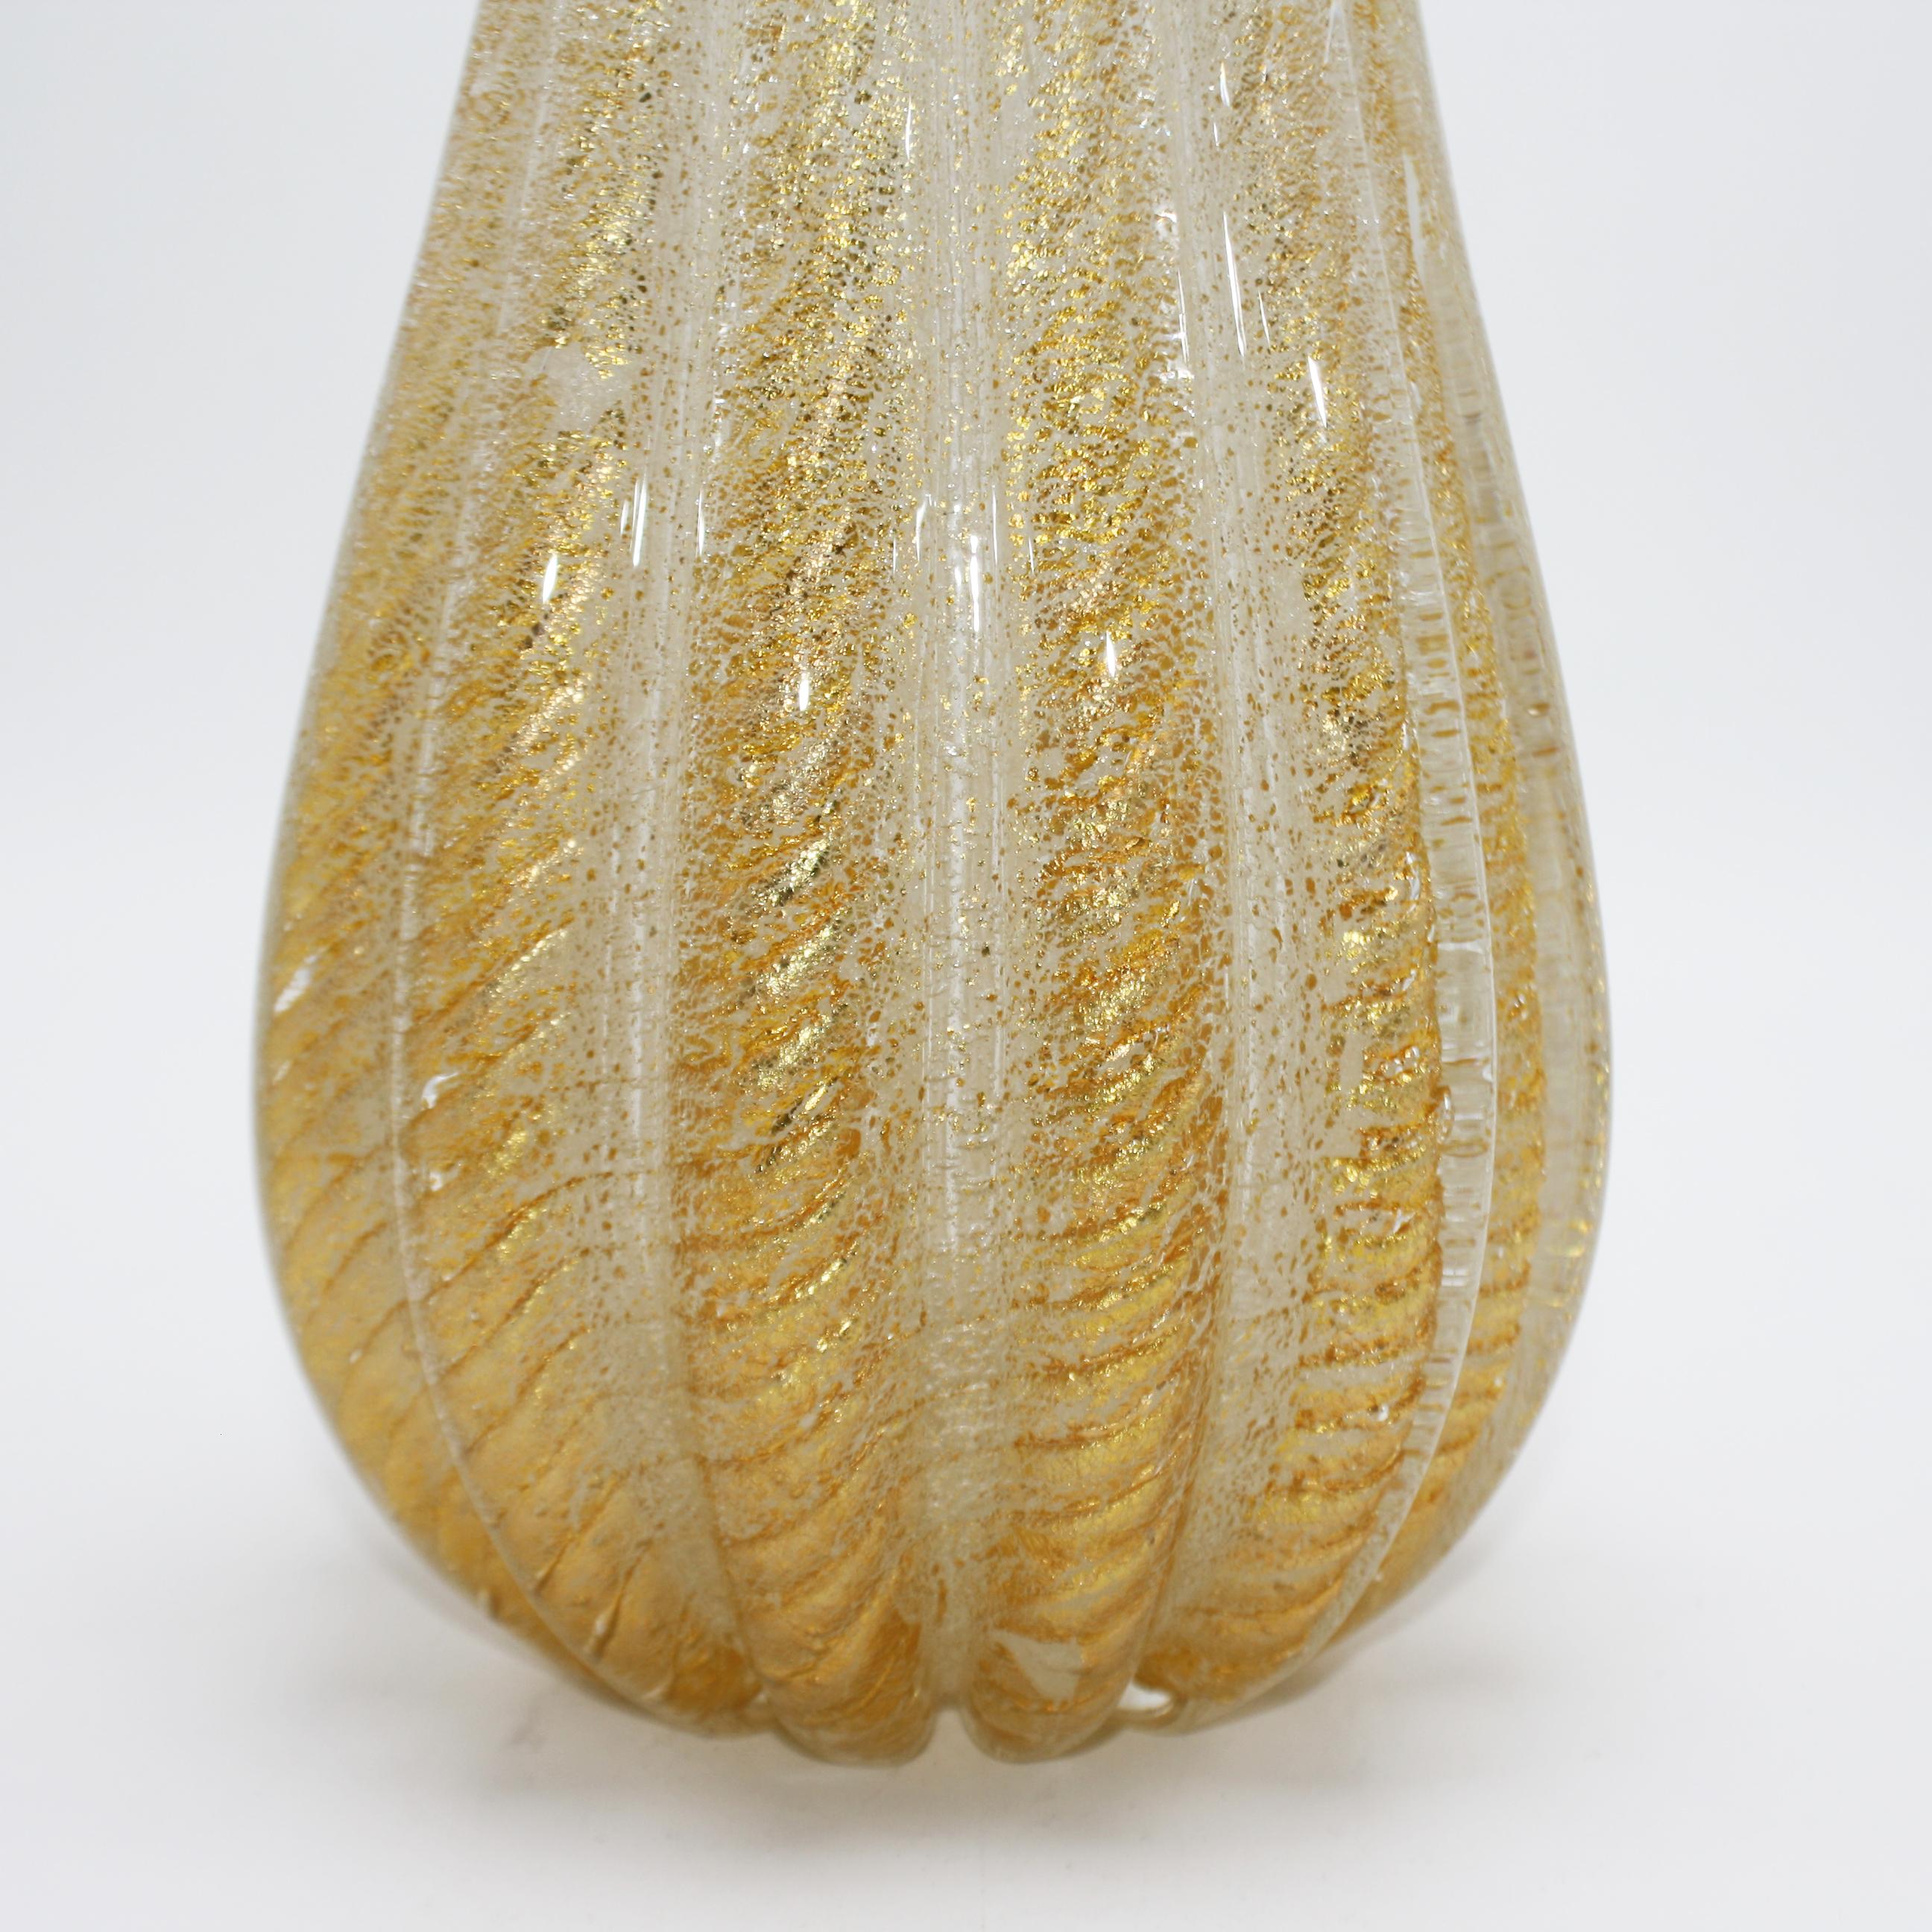 Italian Barovier & Toso Gold Inlaid Vase with Bubble Inclusions, circa 1950